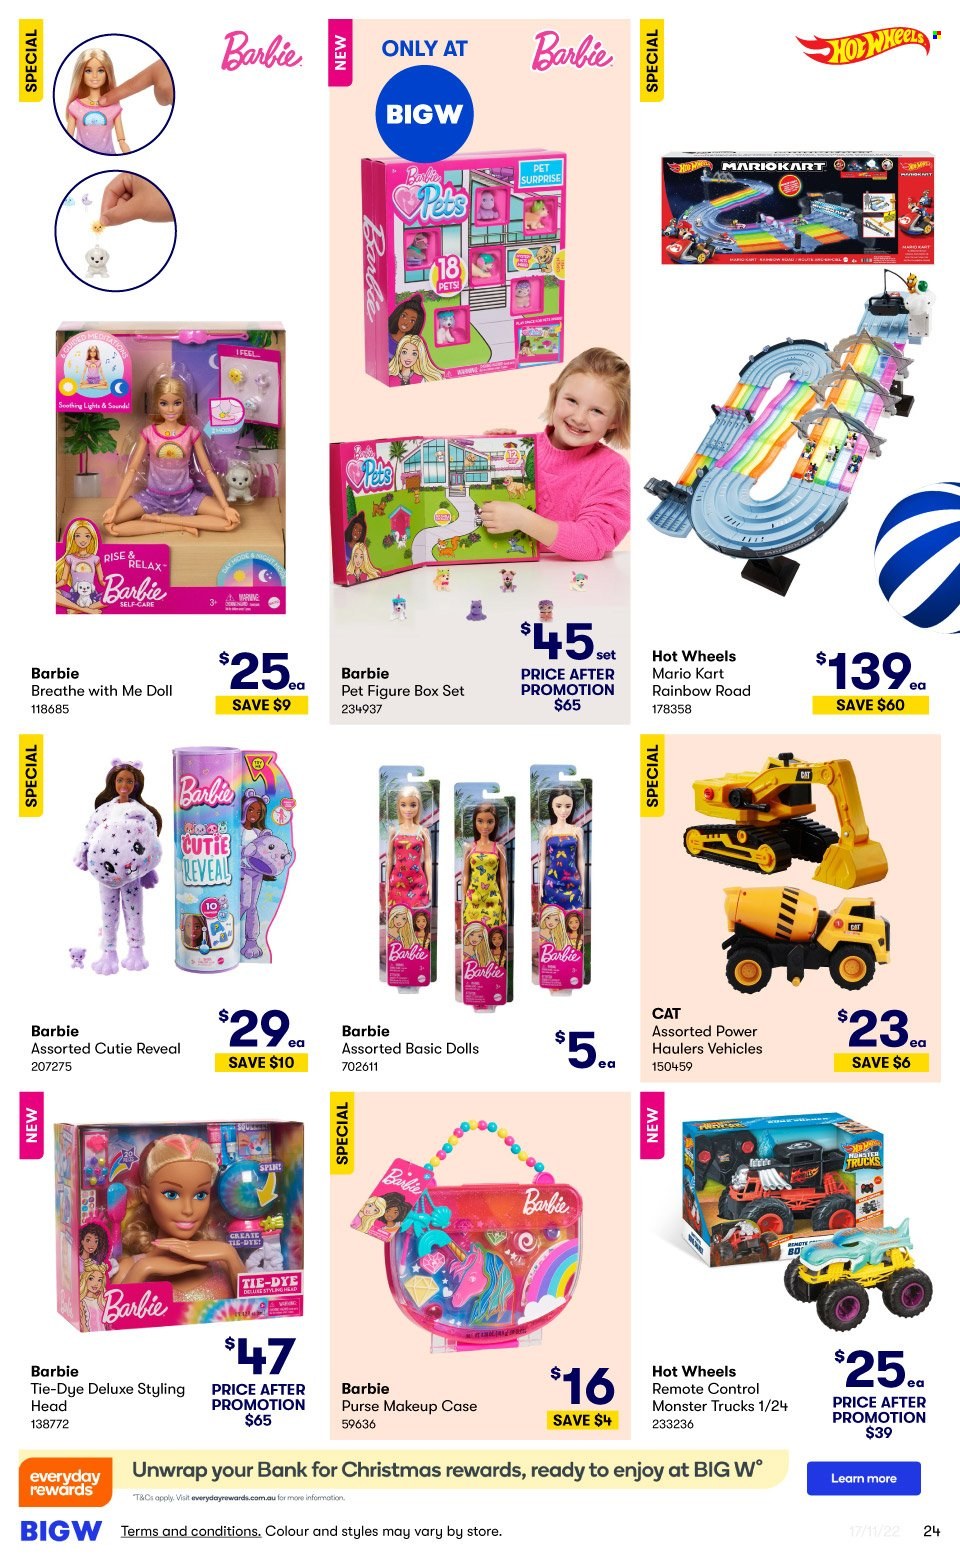 thumbnail - BIG W Catalogue - Sales products - Hot Wheels, makeup, Barbie, remote control, makeup case, doll, styling head, Monster Trucks. Page 24.